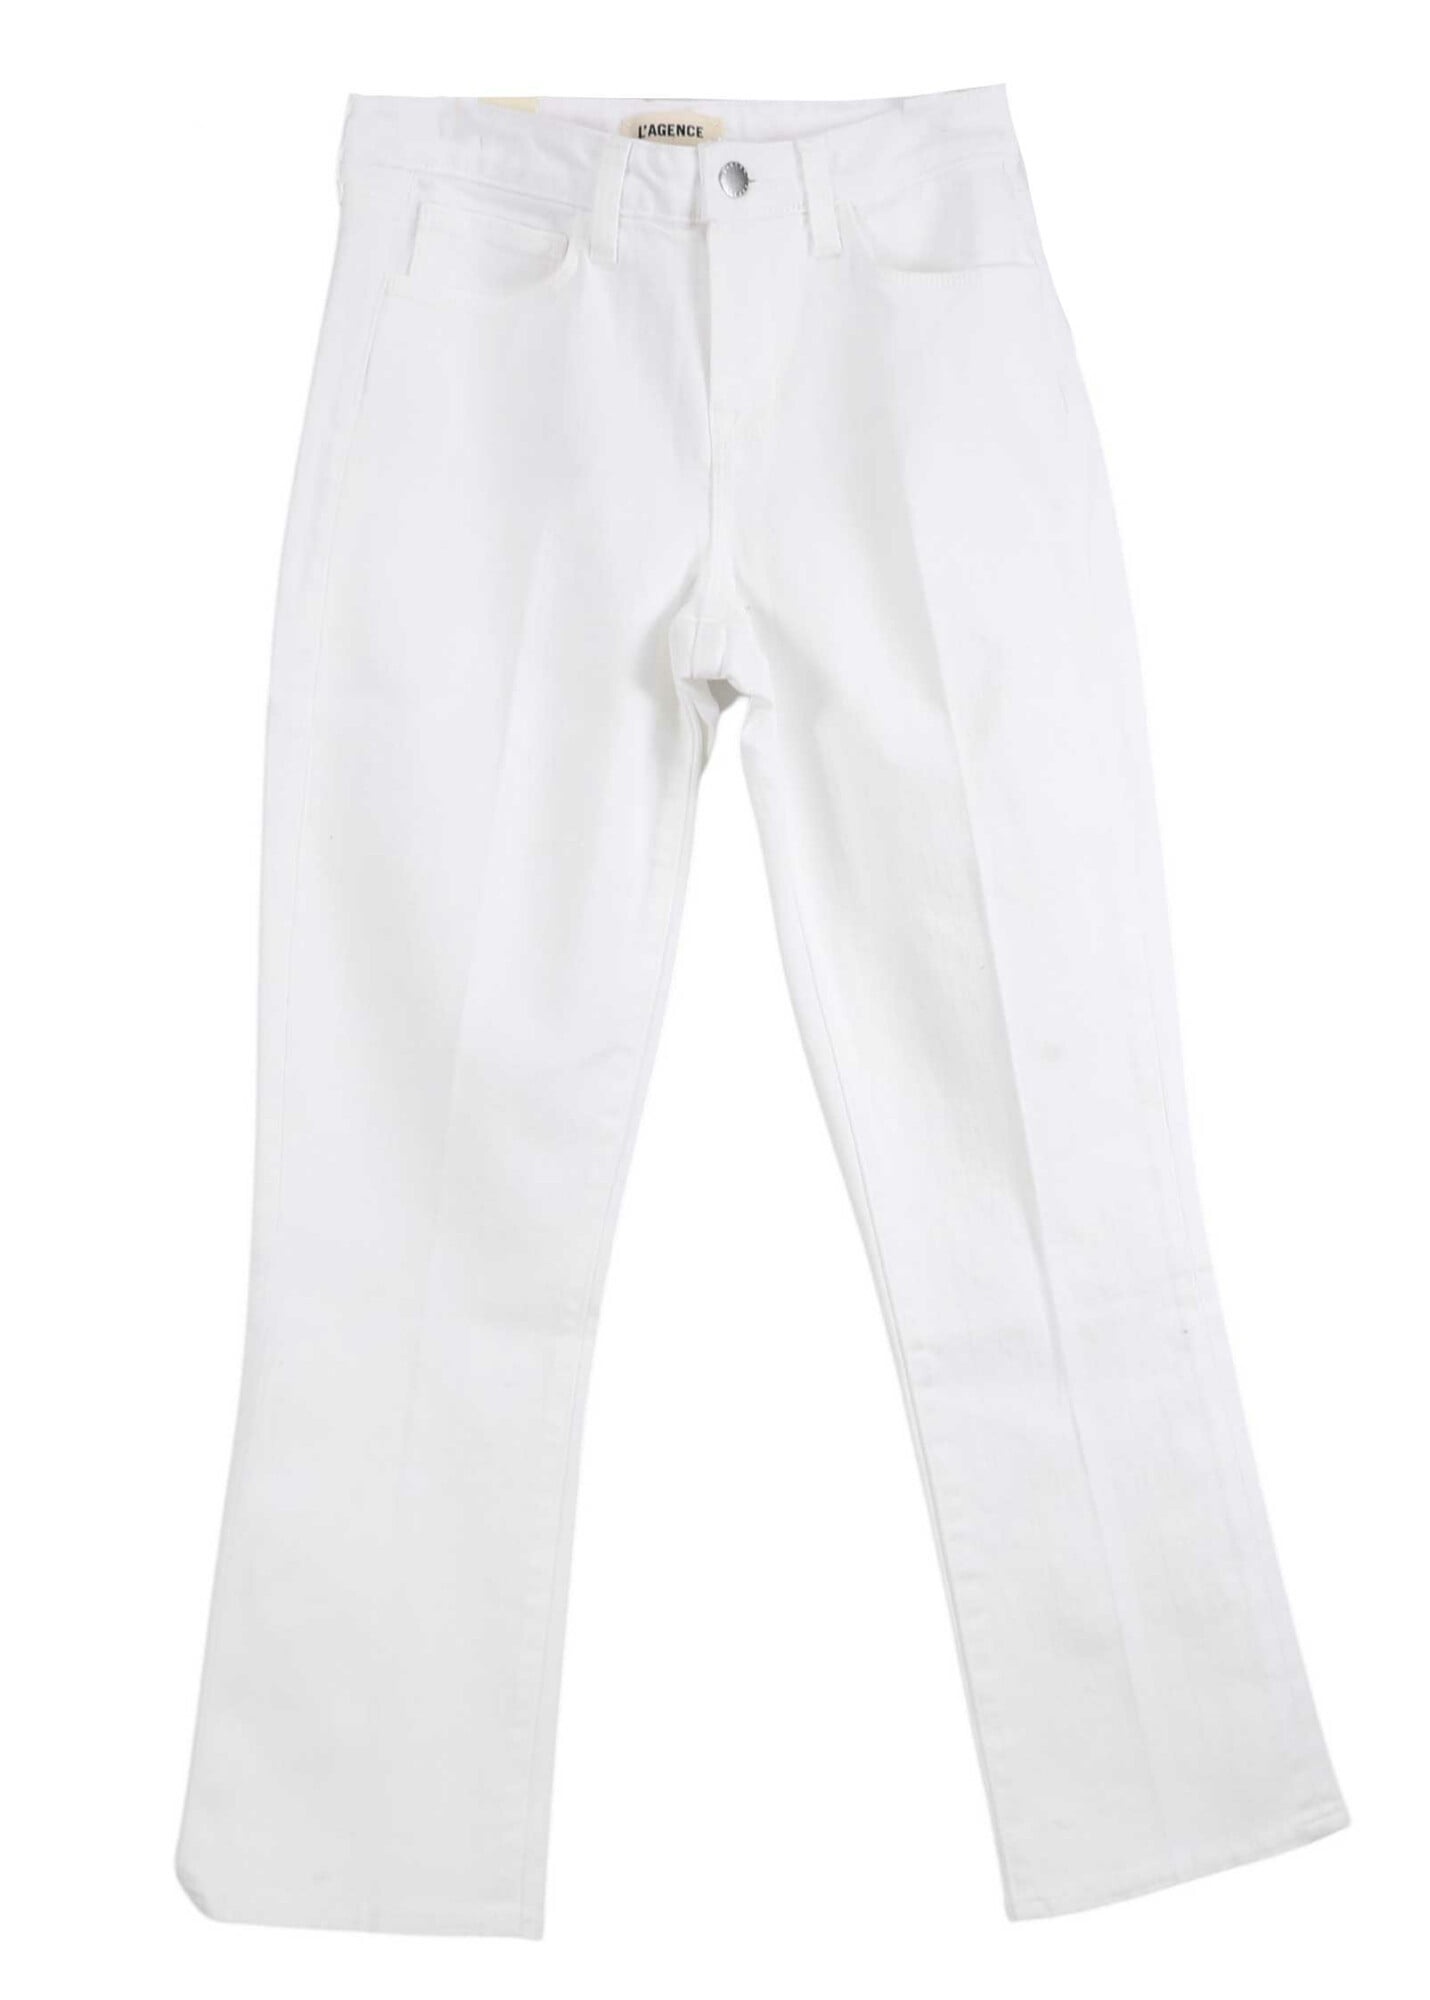 L'agence Women's Blanc Nadia High Rise Cropped Straight Jean - S(2-4 ...